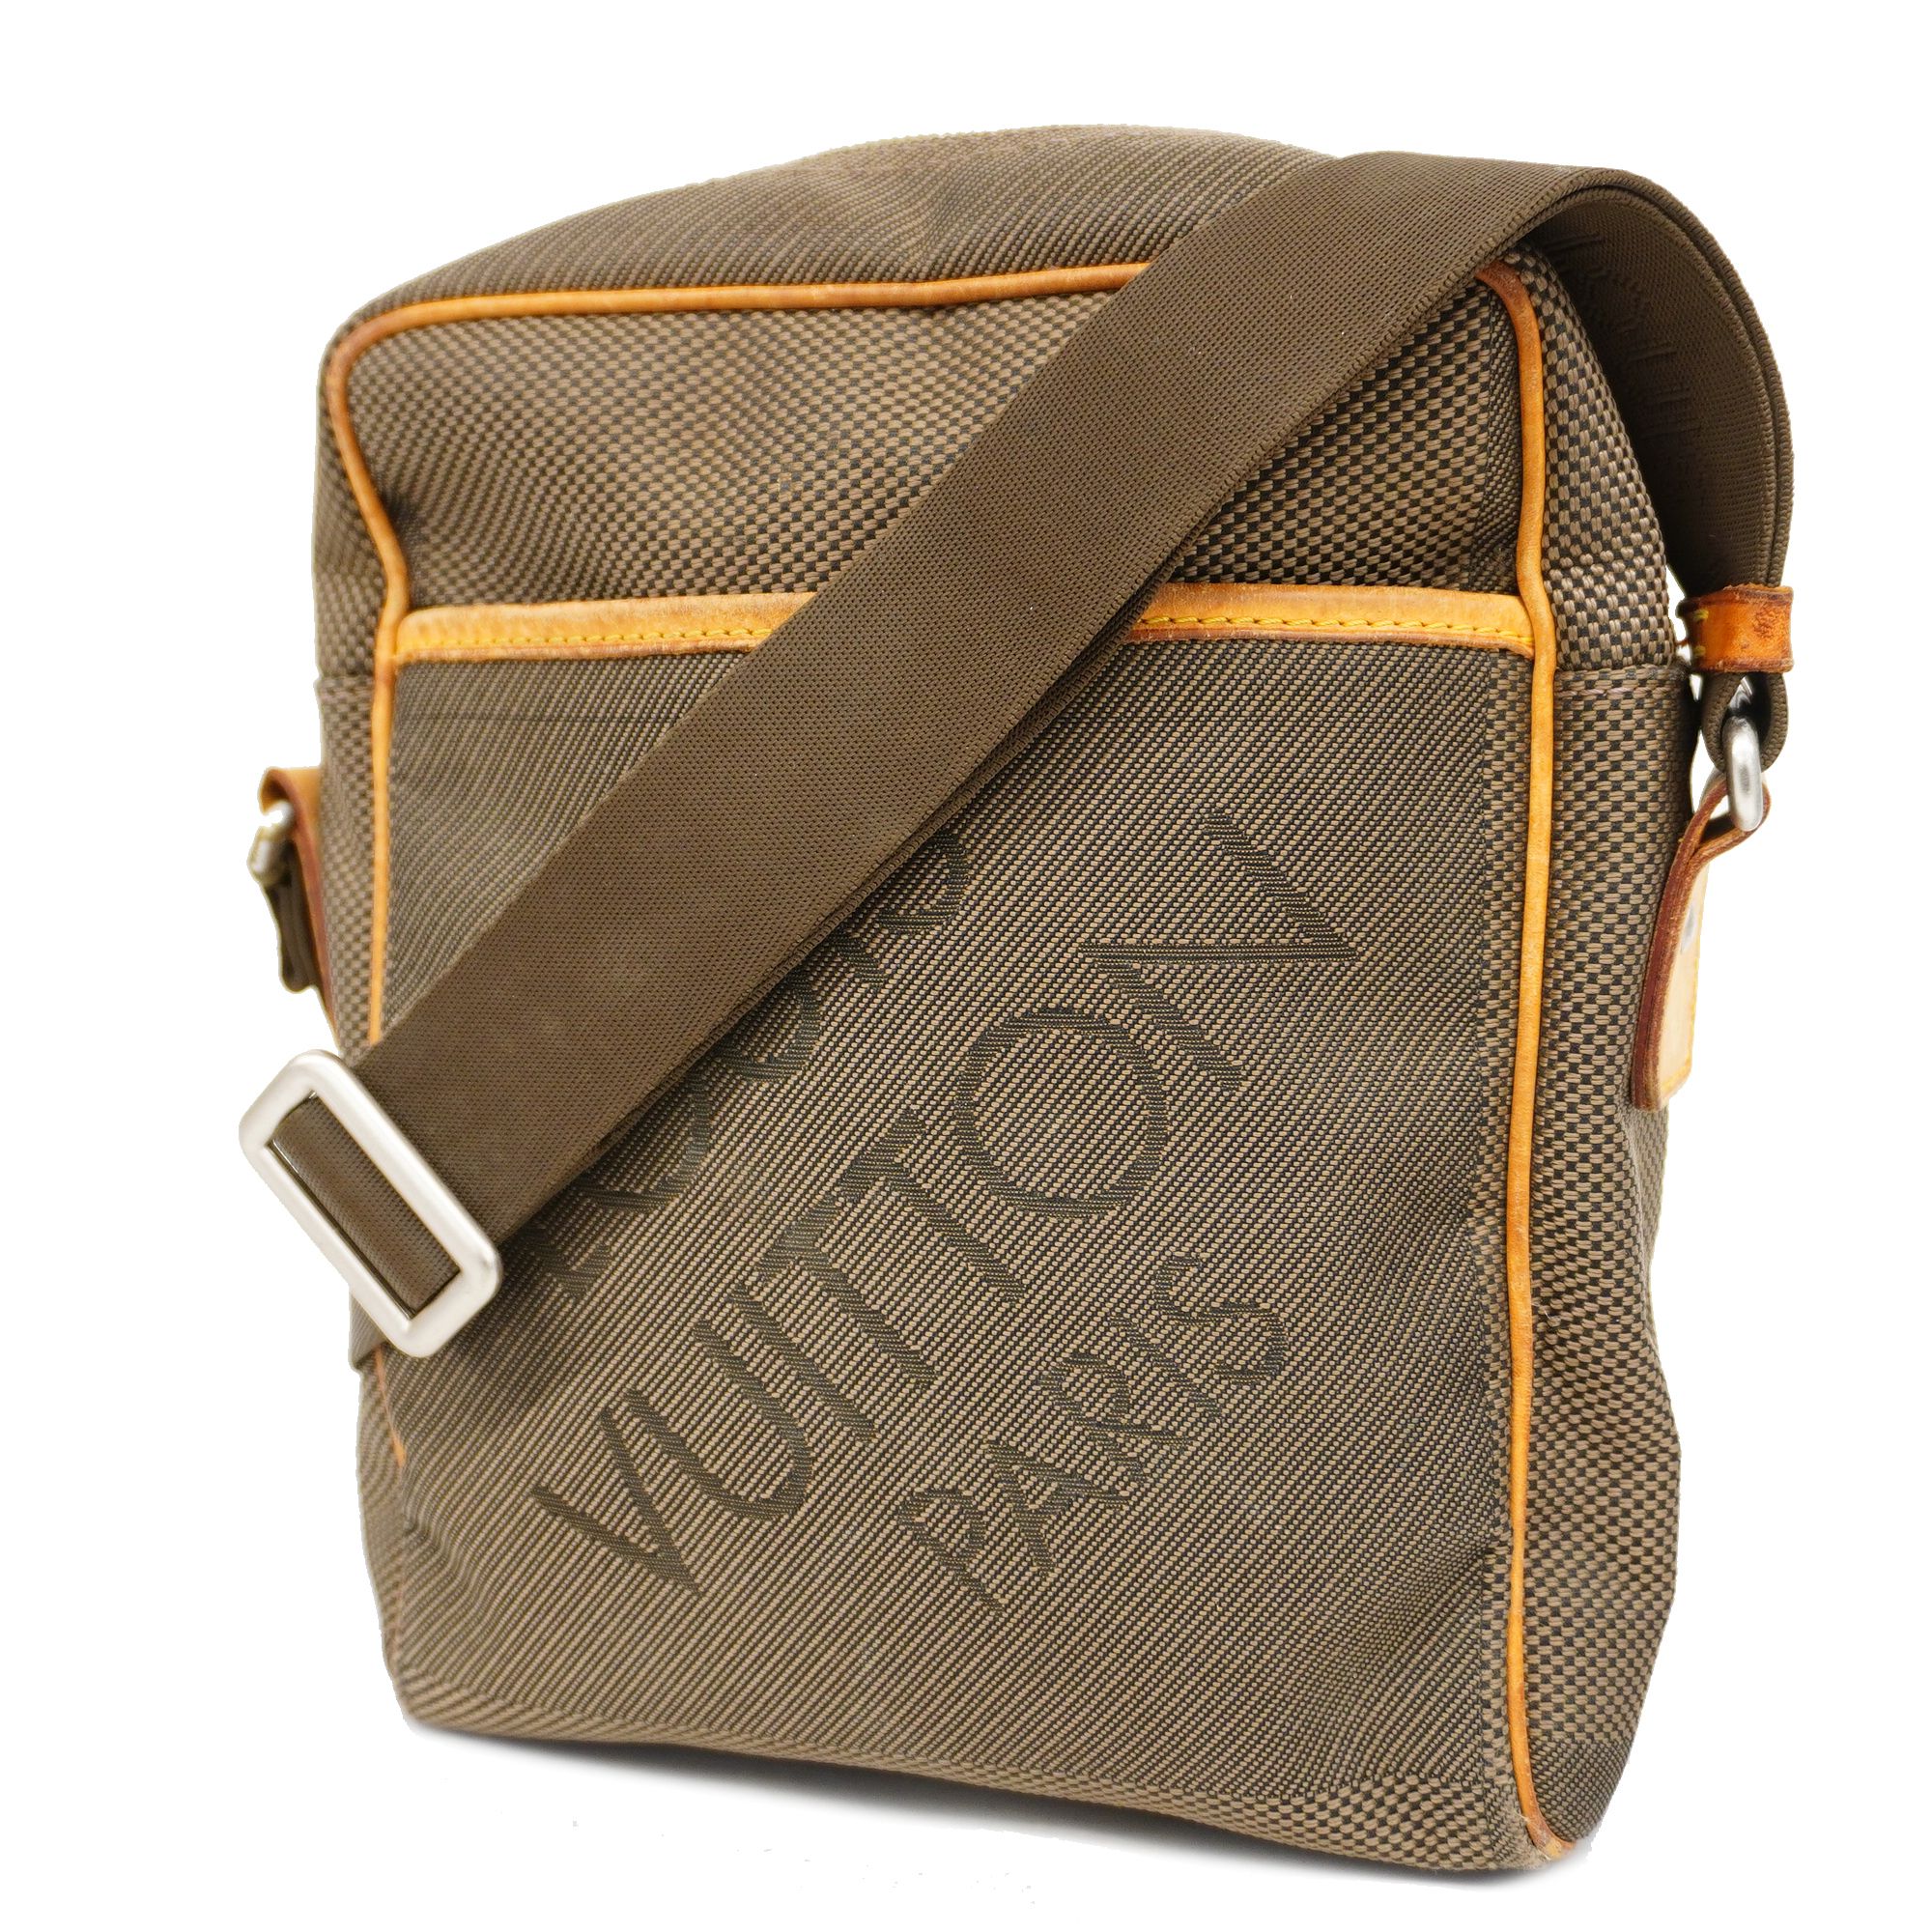 Louis Vuitton Geant Bag Collection From Spring/Summer 2019